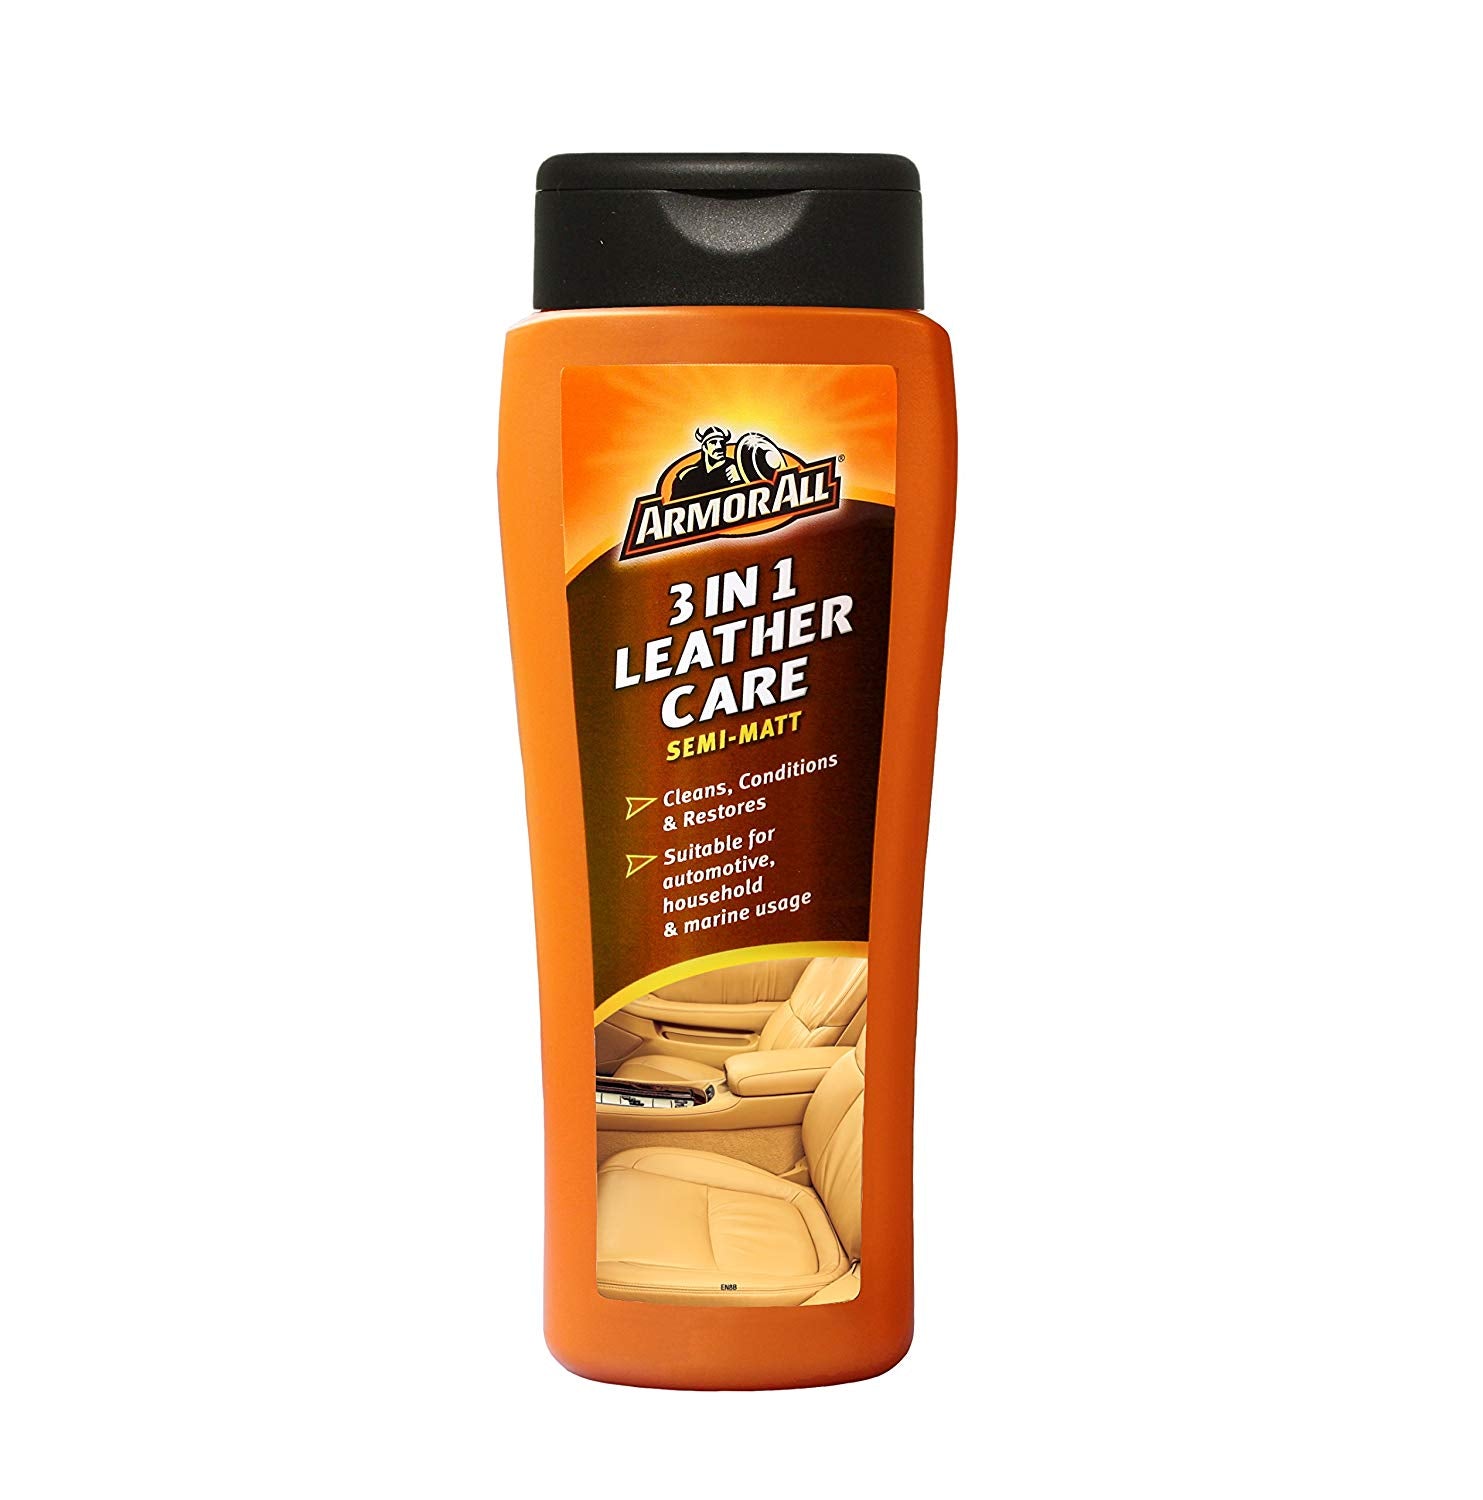 Armor All 3 in 1 Leather Care, 250 ml